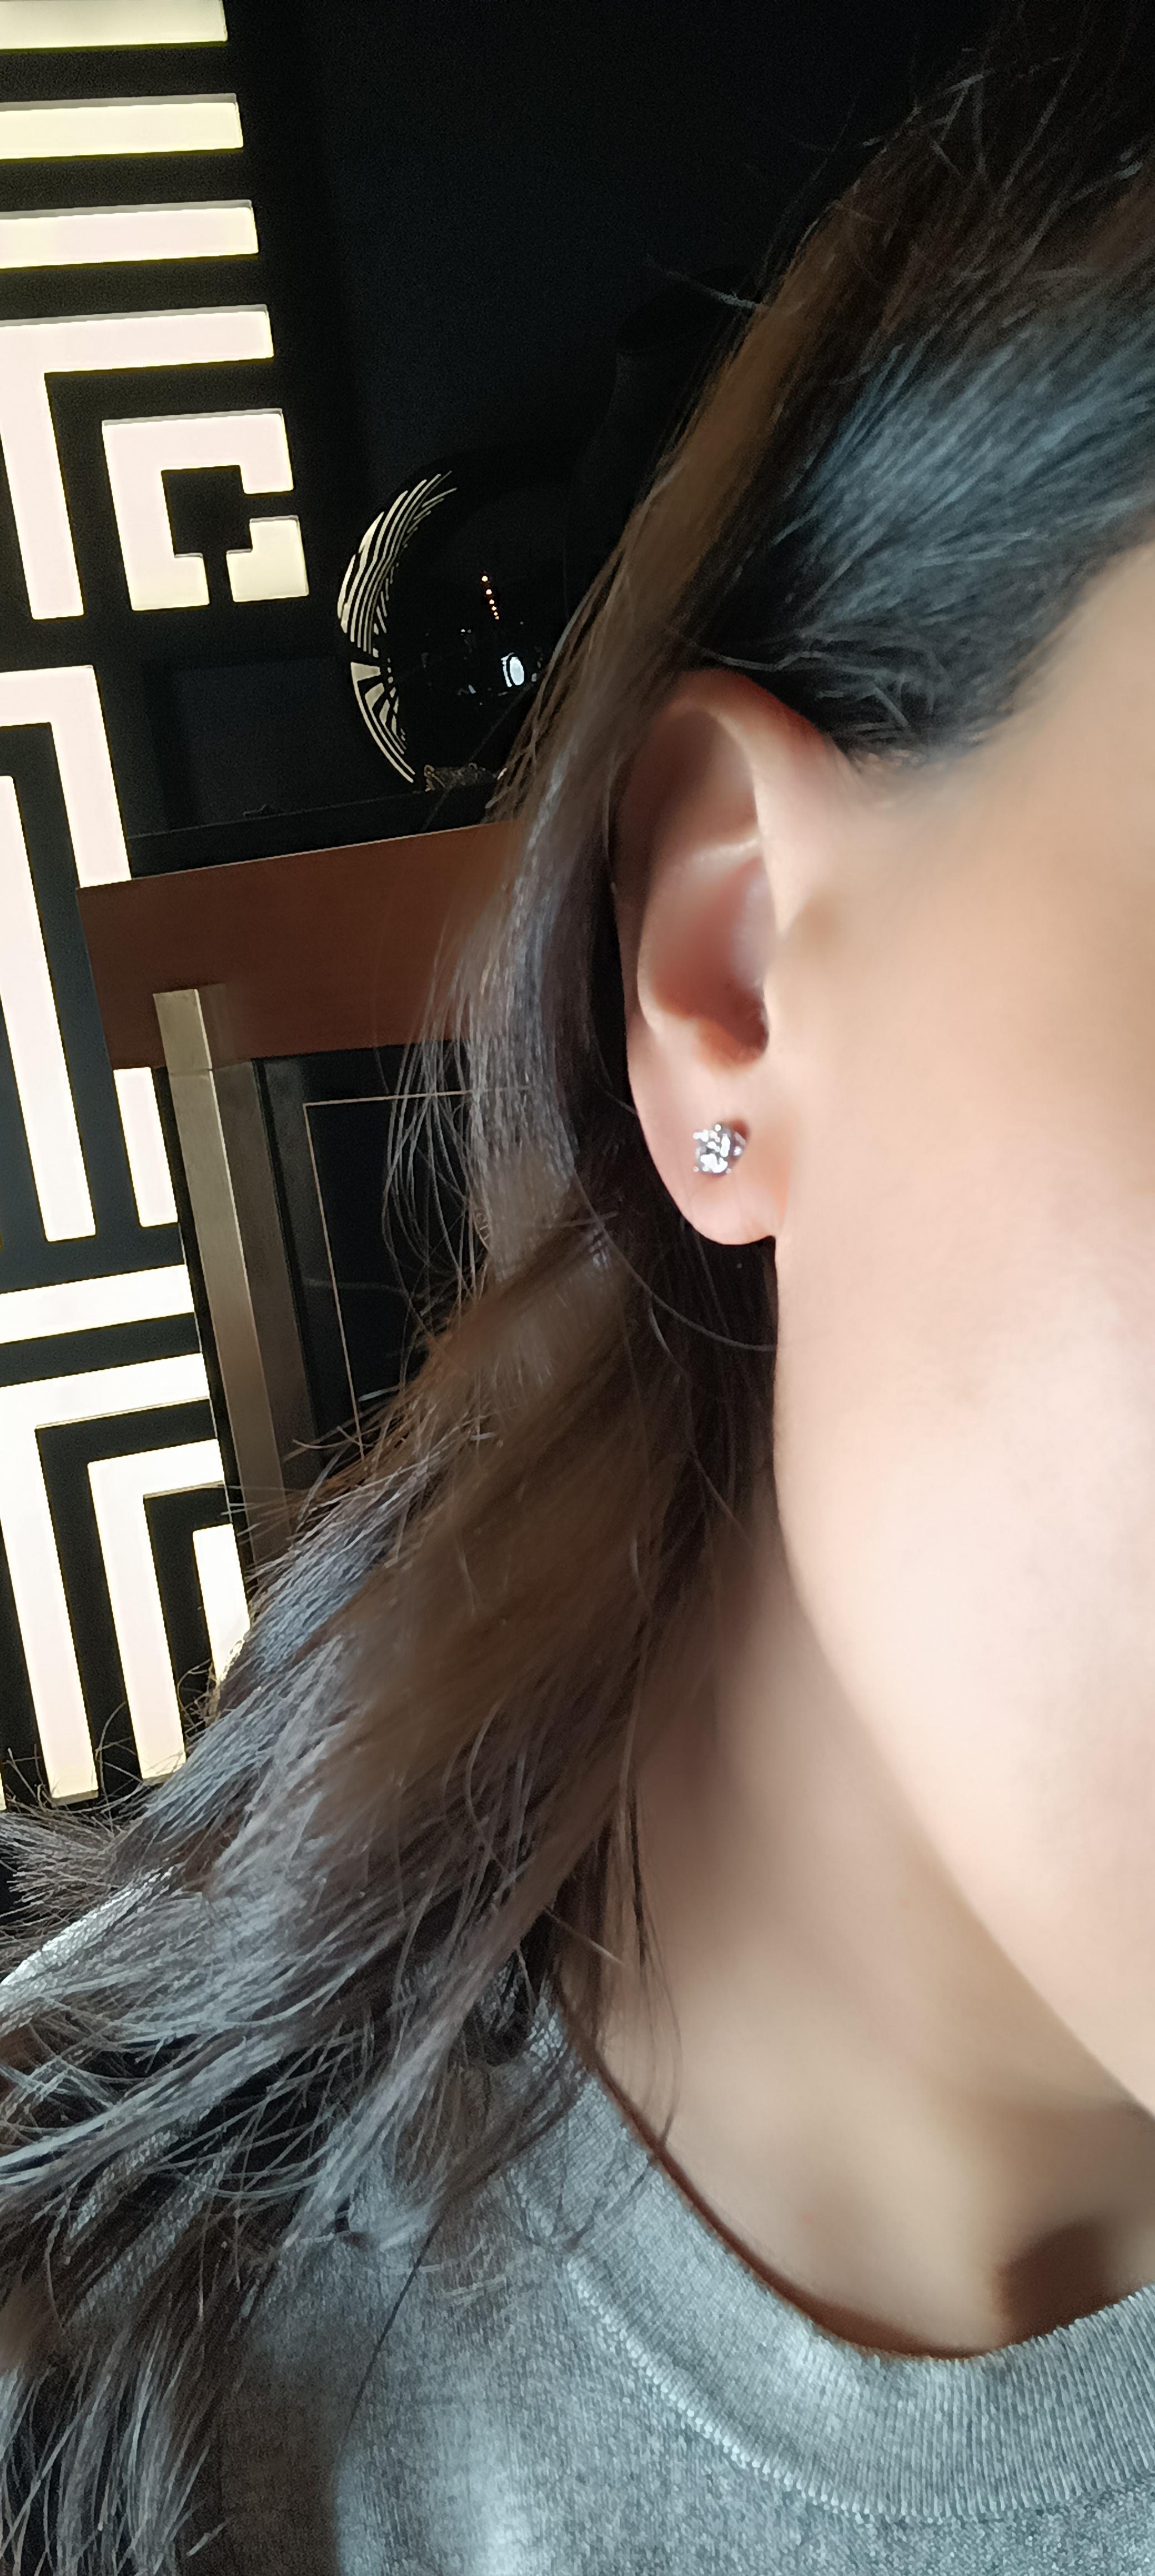 This timeless classic  is all about the round brilliant cut stone, a magnificent 1 carat VS G color stone, mounted on a refined 18 carat white gold earring.s grams 2.06
any item of our jewelry collection has a dedicated identification number lasered